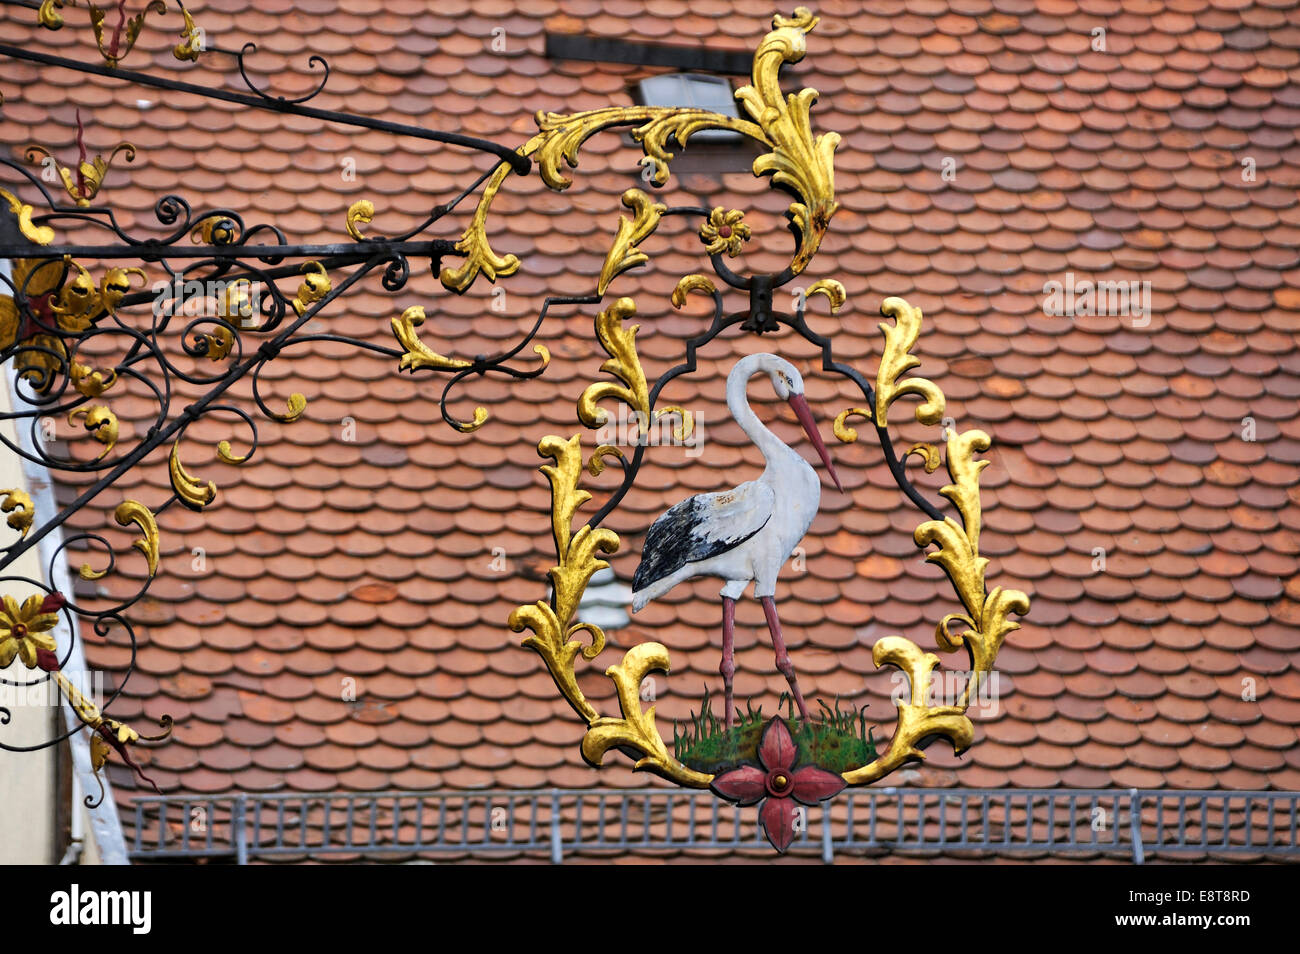 Hanging sign from the 'Zum Storchen' restaurant , in since about 1580, roof with plain tiles at back, Bad Windsheim Stock Photo